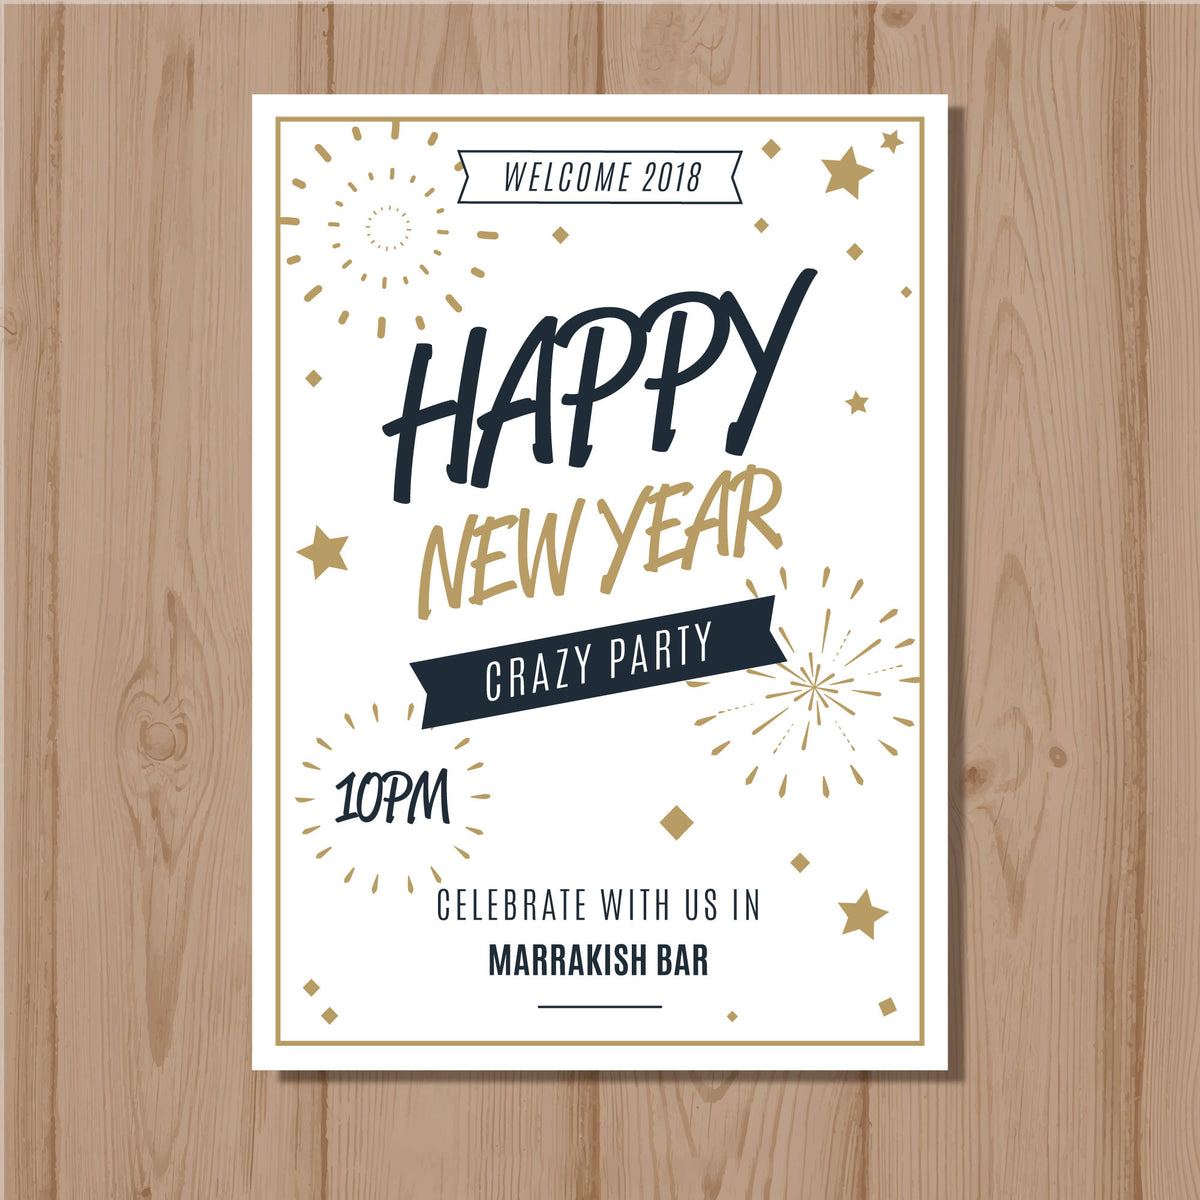 Plantable Crazy K New Year Party Invitation & Eco Greetings